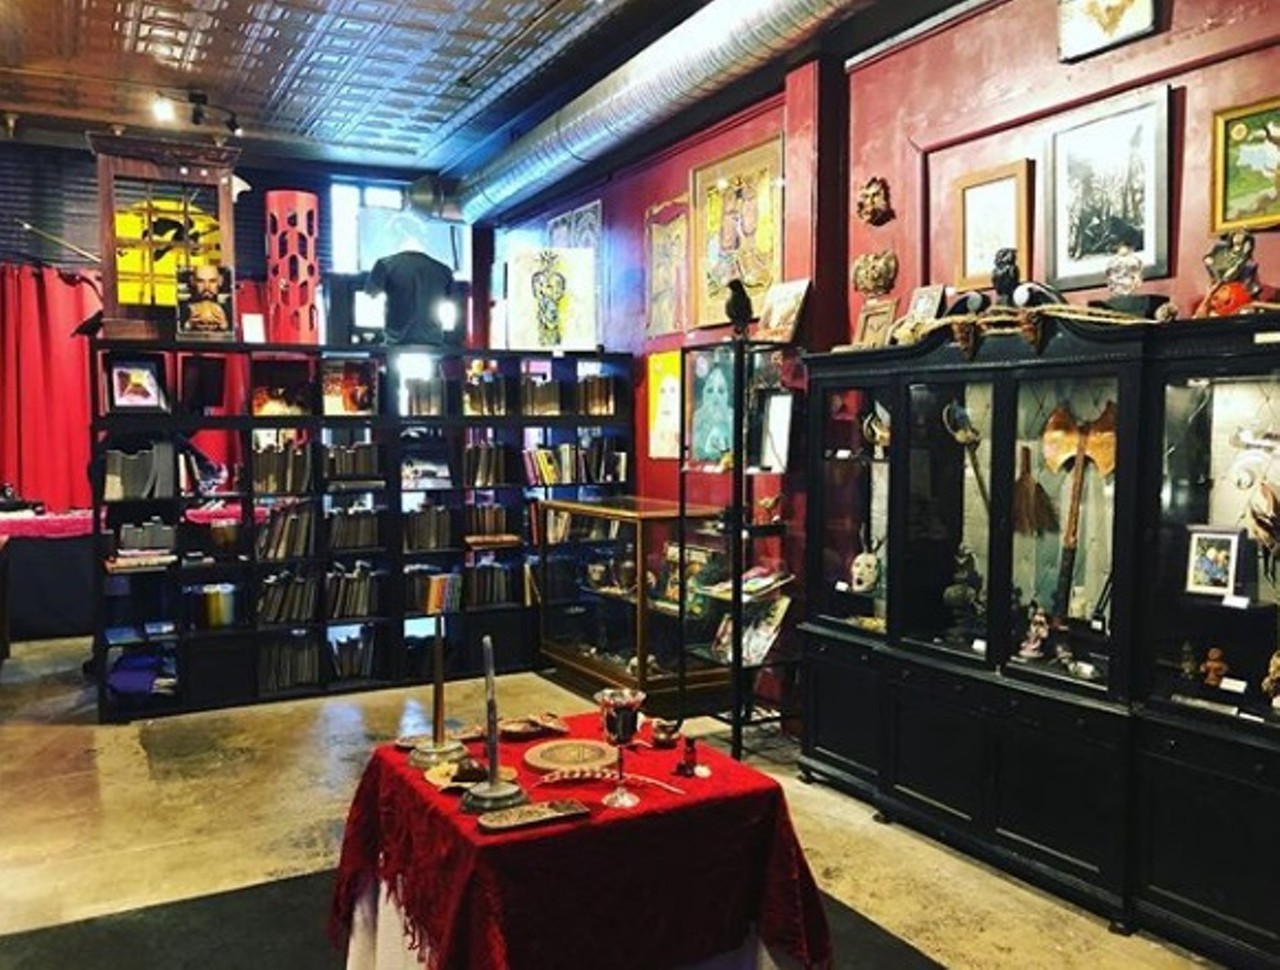 Buckland Museum of Witchcraft & Magic
2155 Broadview Rd., 718-709-6643
Embrace the unfavorable weather and enjoy a rainy day with the magic side of life. Stop in to shop or ask about their lectures and special events on everything magic and witchcraft. 
Photo via lilithavalon/Instagram